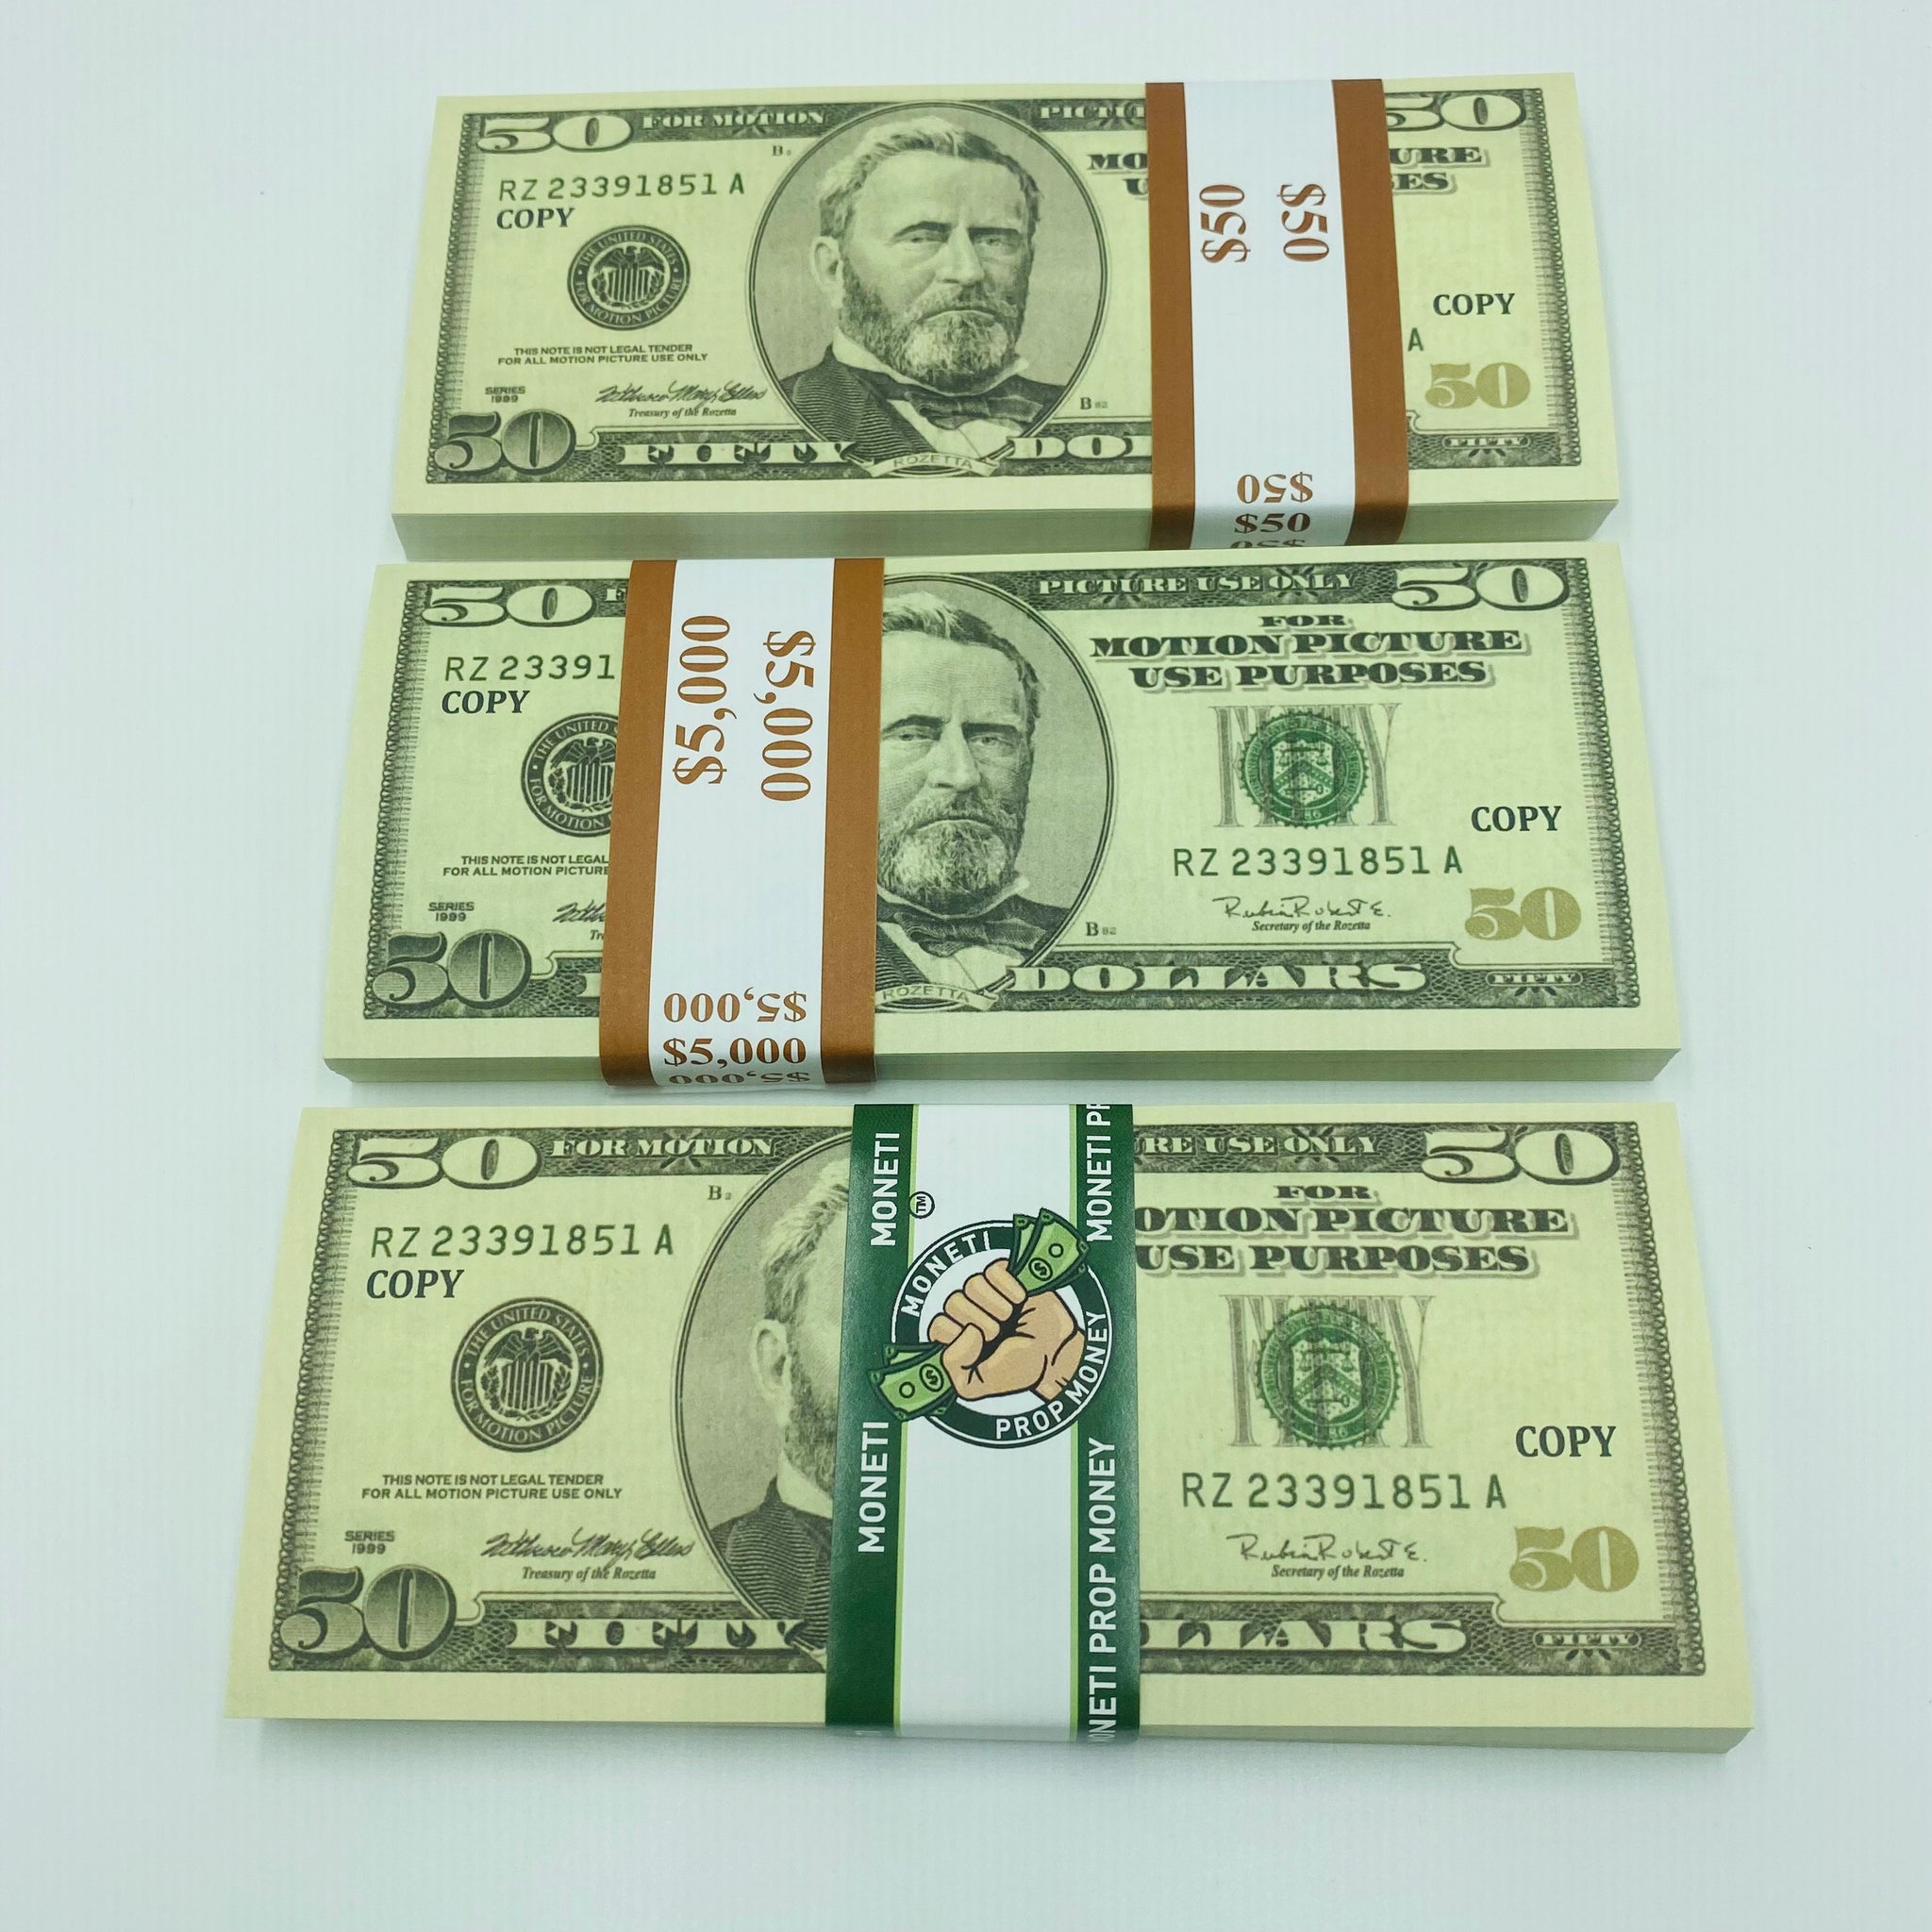 Money that looks real